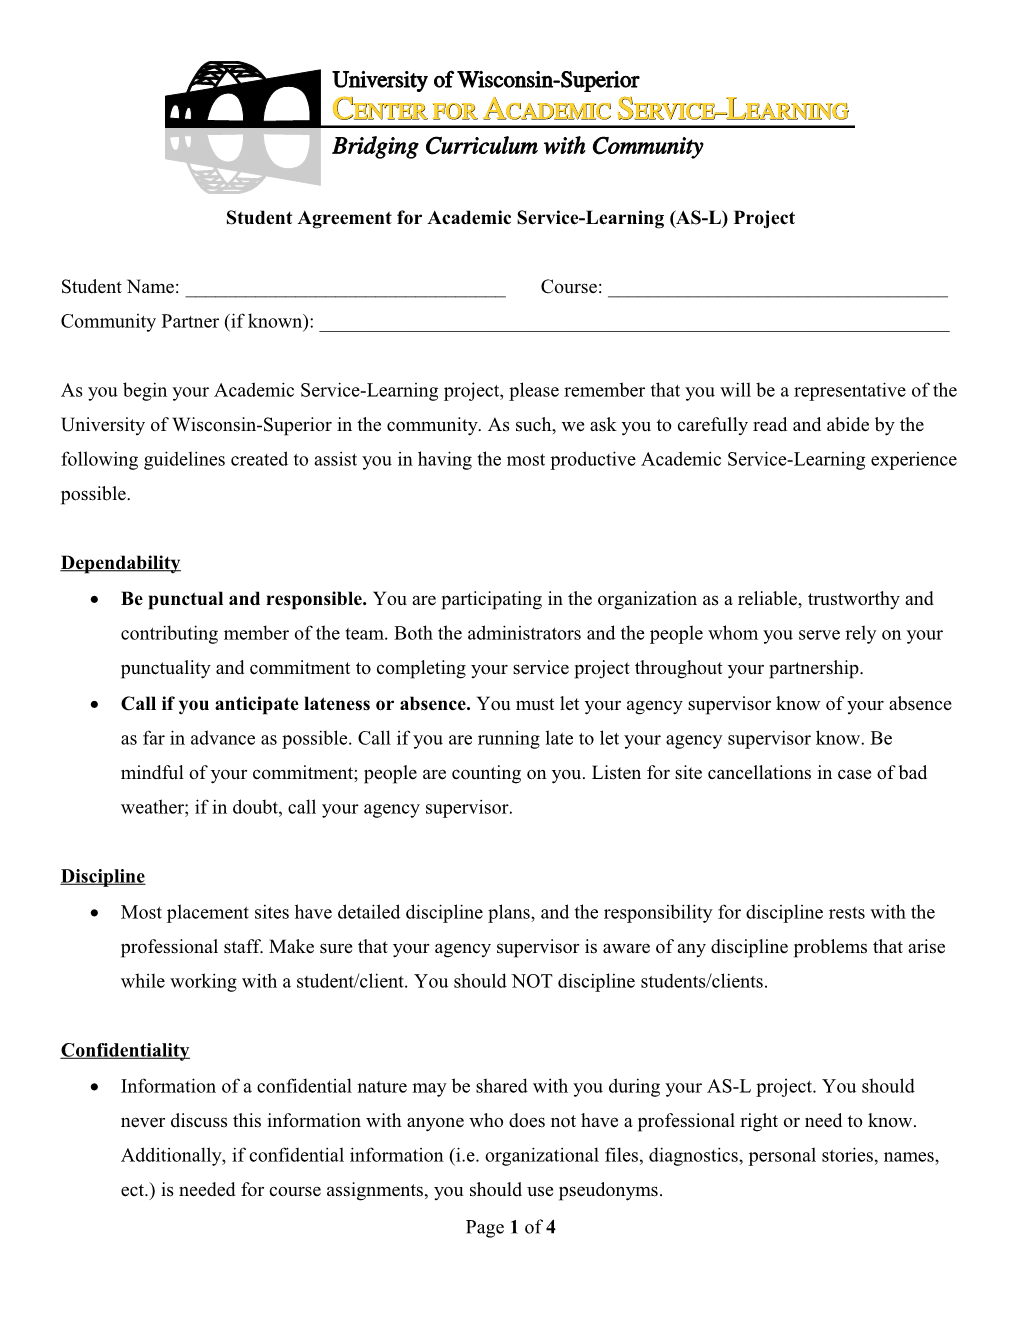 Student Agreement for Academic Service-Learning (AS-L) Project